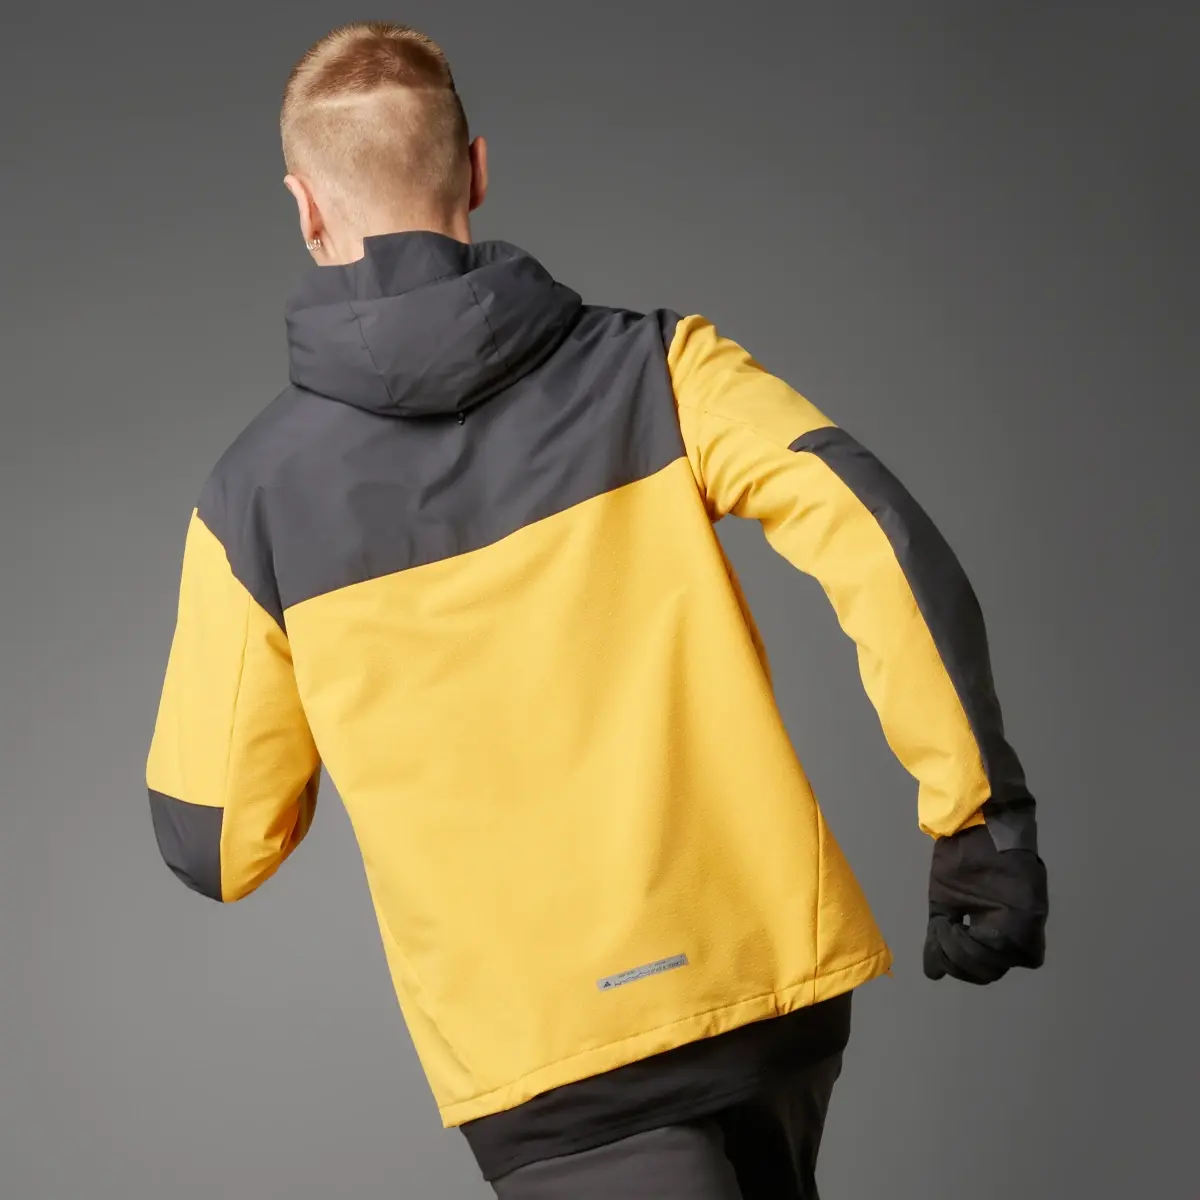 Adidas Ultimate Running Conquer the Elements COLD.RDY Jacket. 2